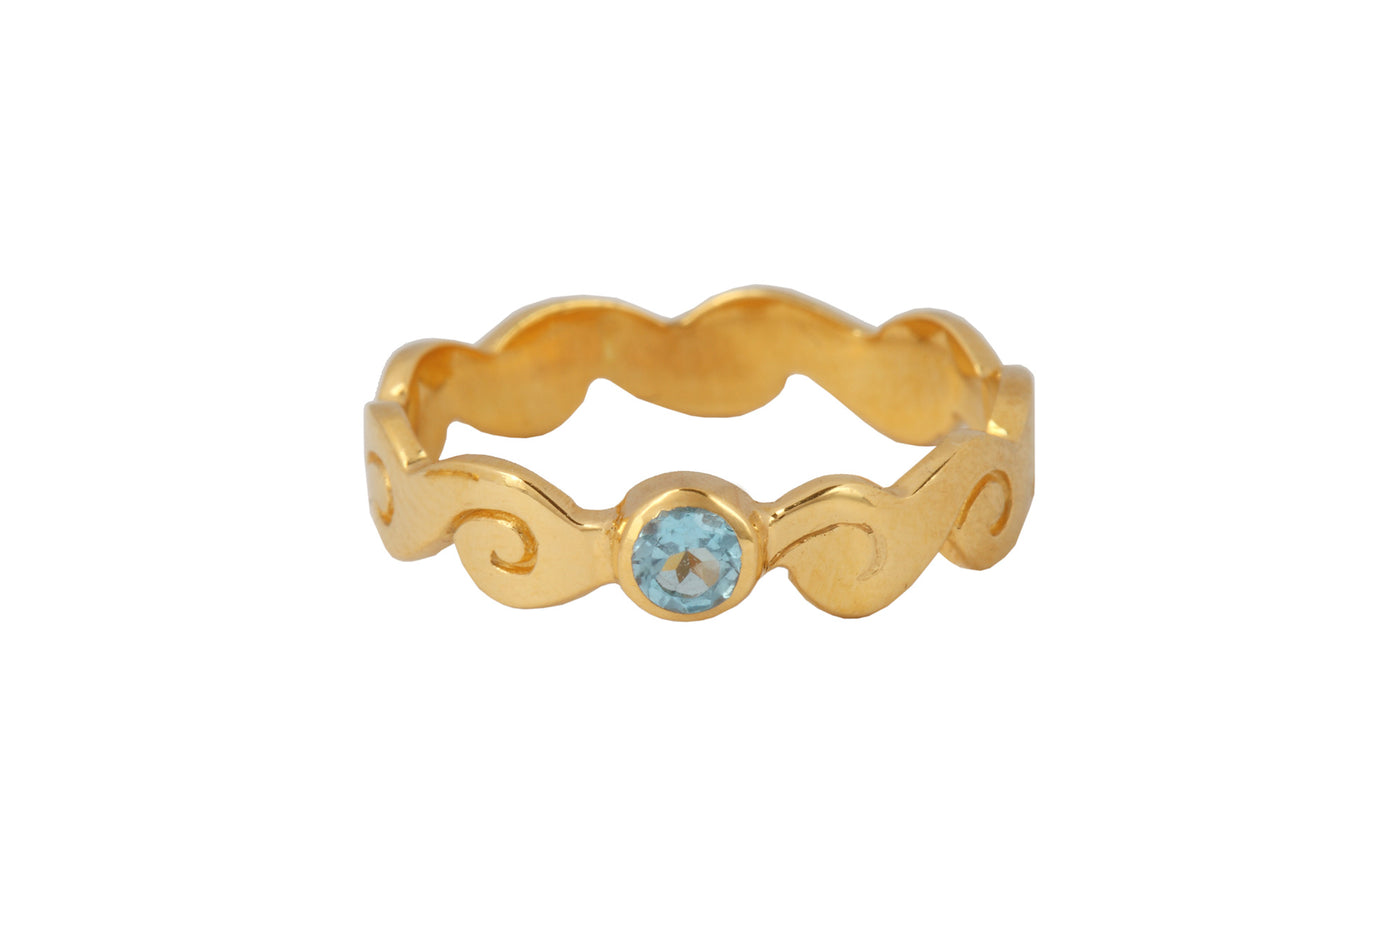 Ring with elements - Water. Gold plated, blue topaz